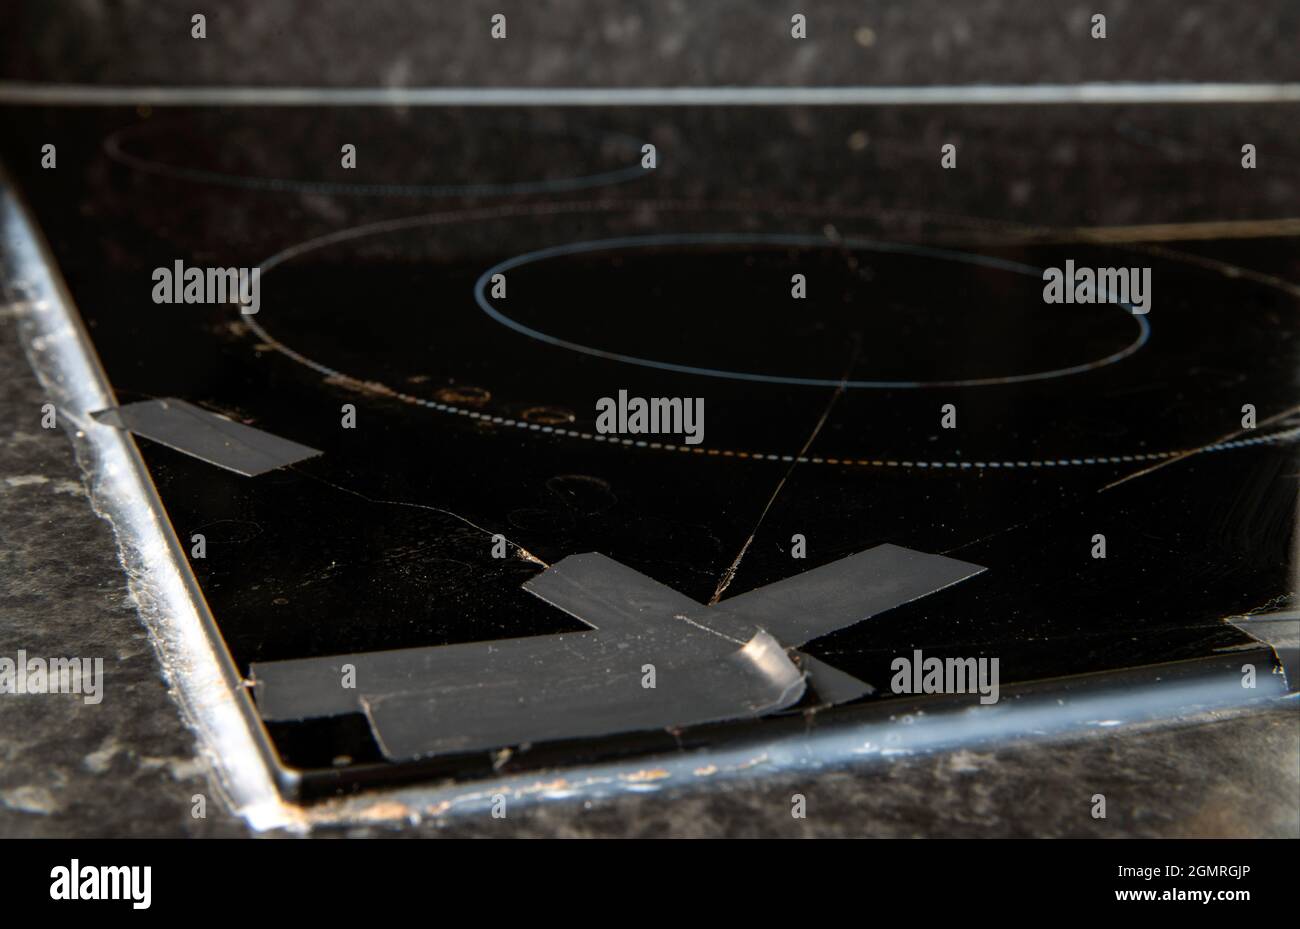 Home disasters: cracked broken ceramic hob covered with tape Stock Photo